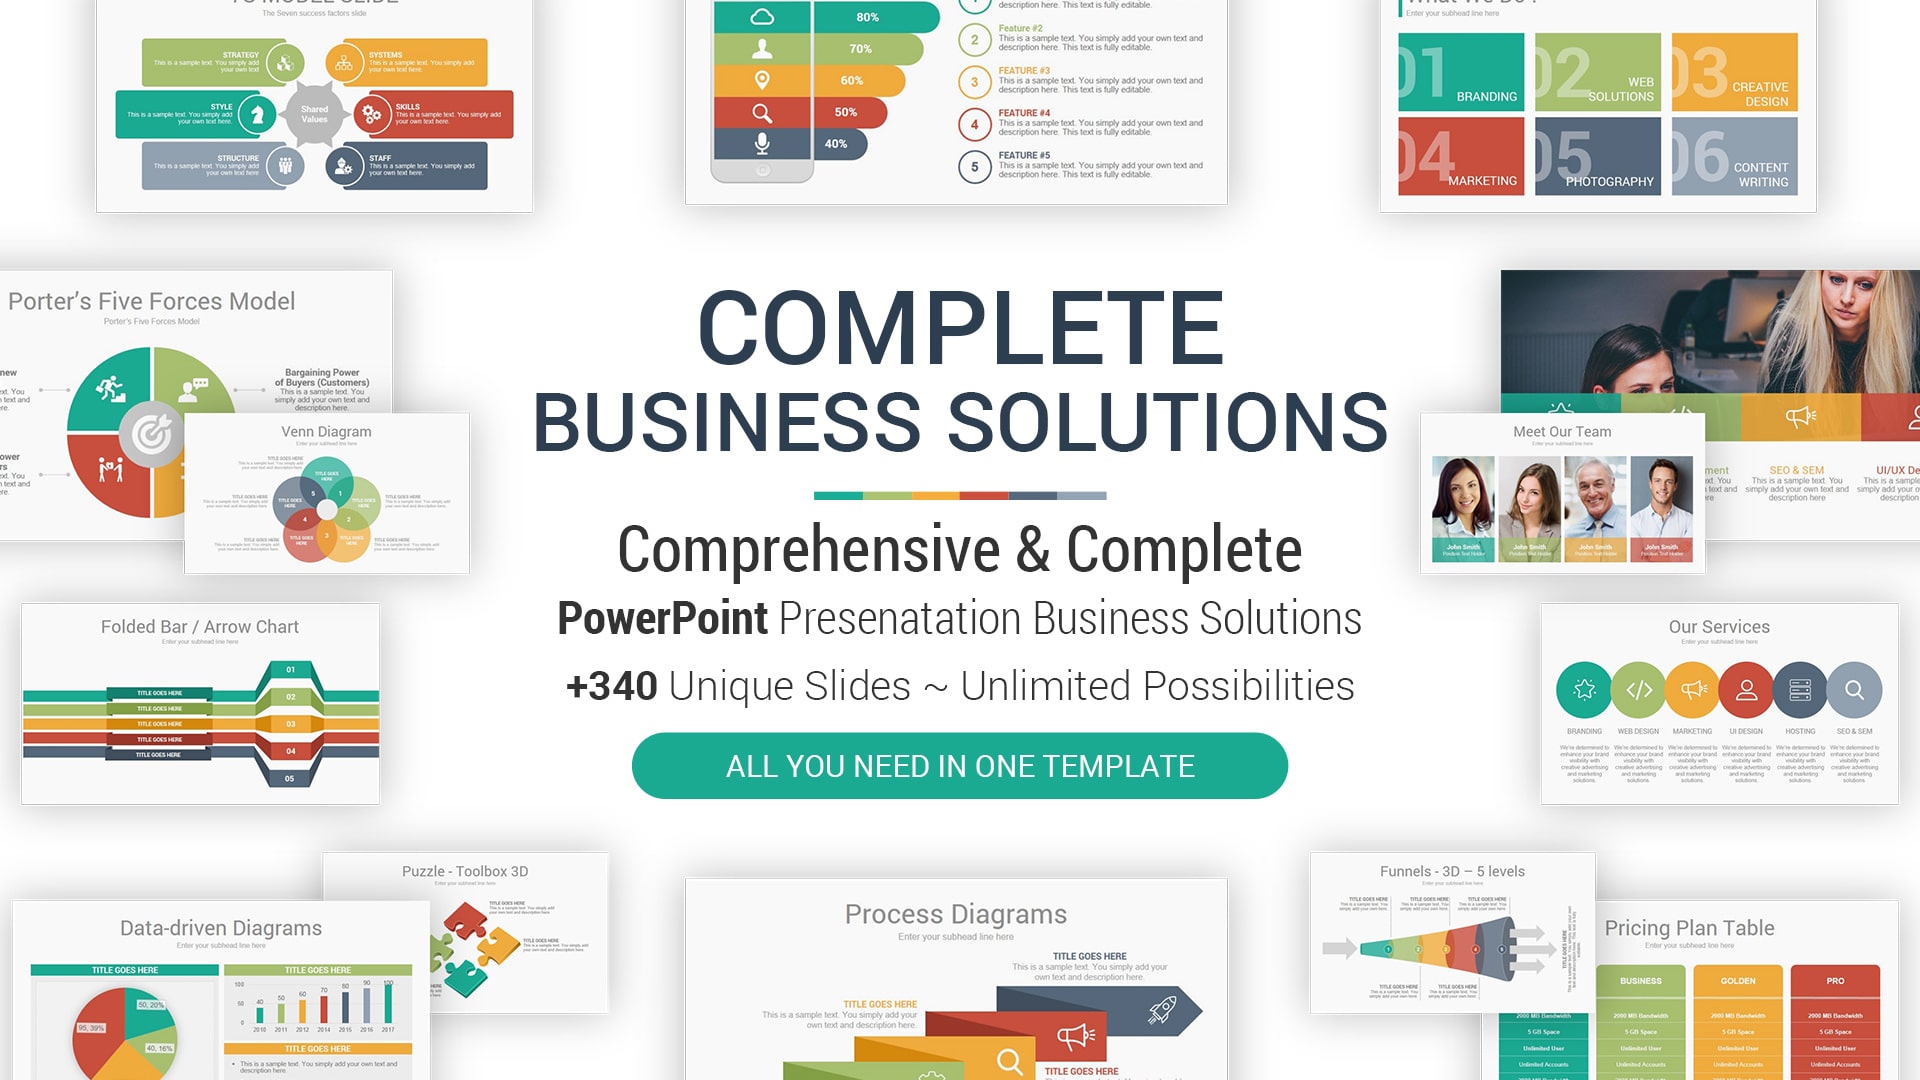 Complete Business Solutions Multipurpose PowerPoint Presentation Template